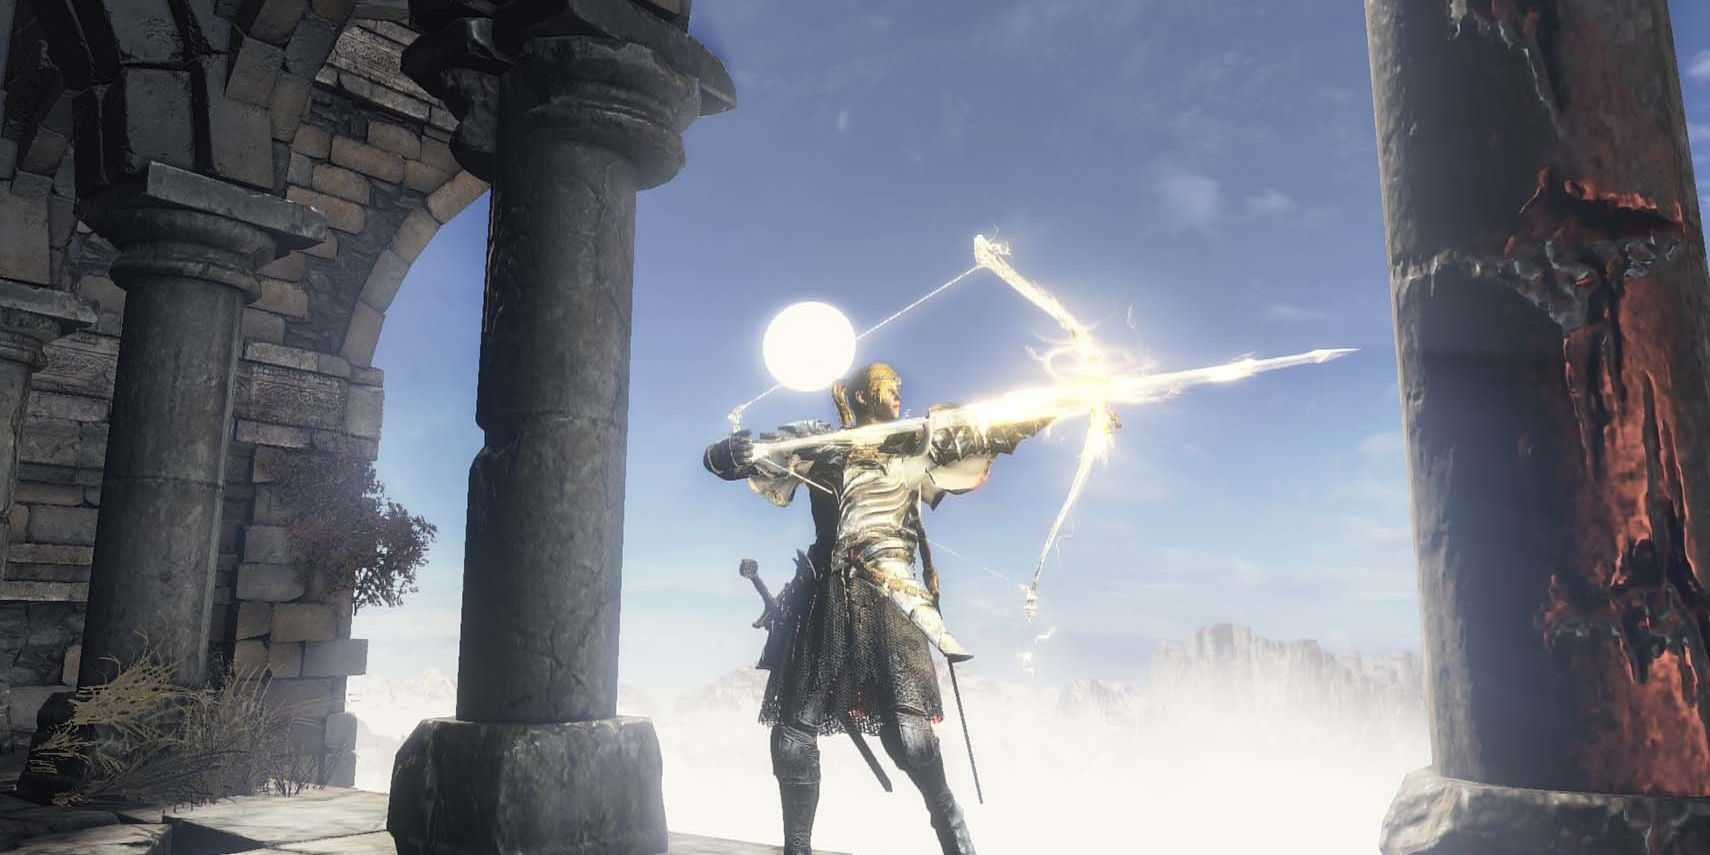 A character creating a shining bow and arrow from light.